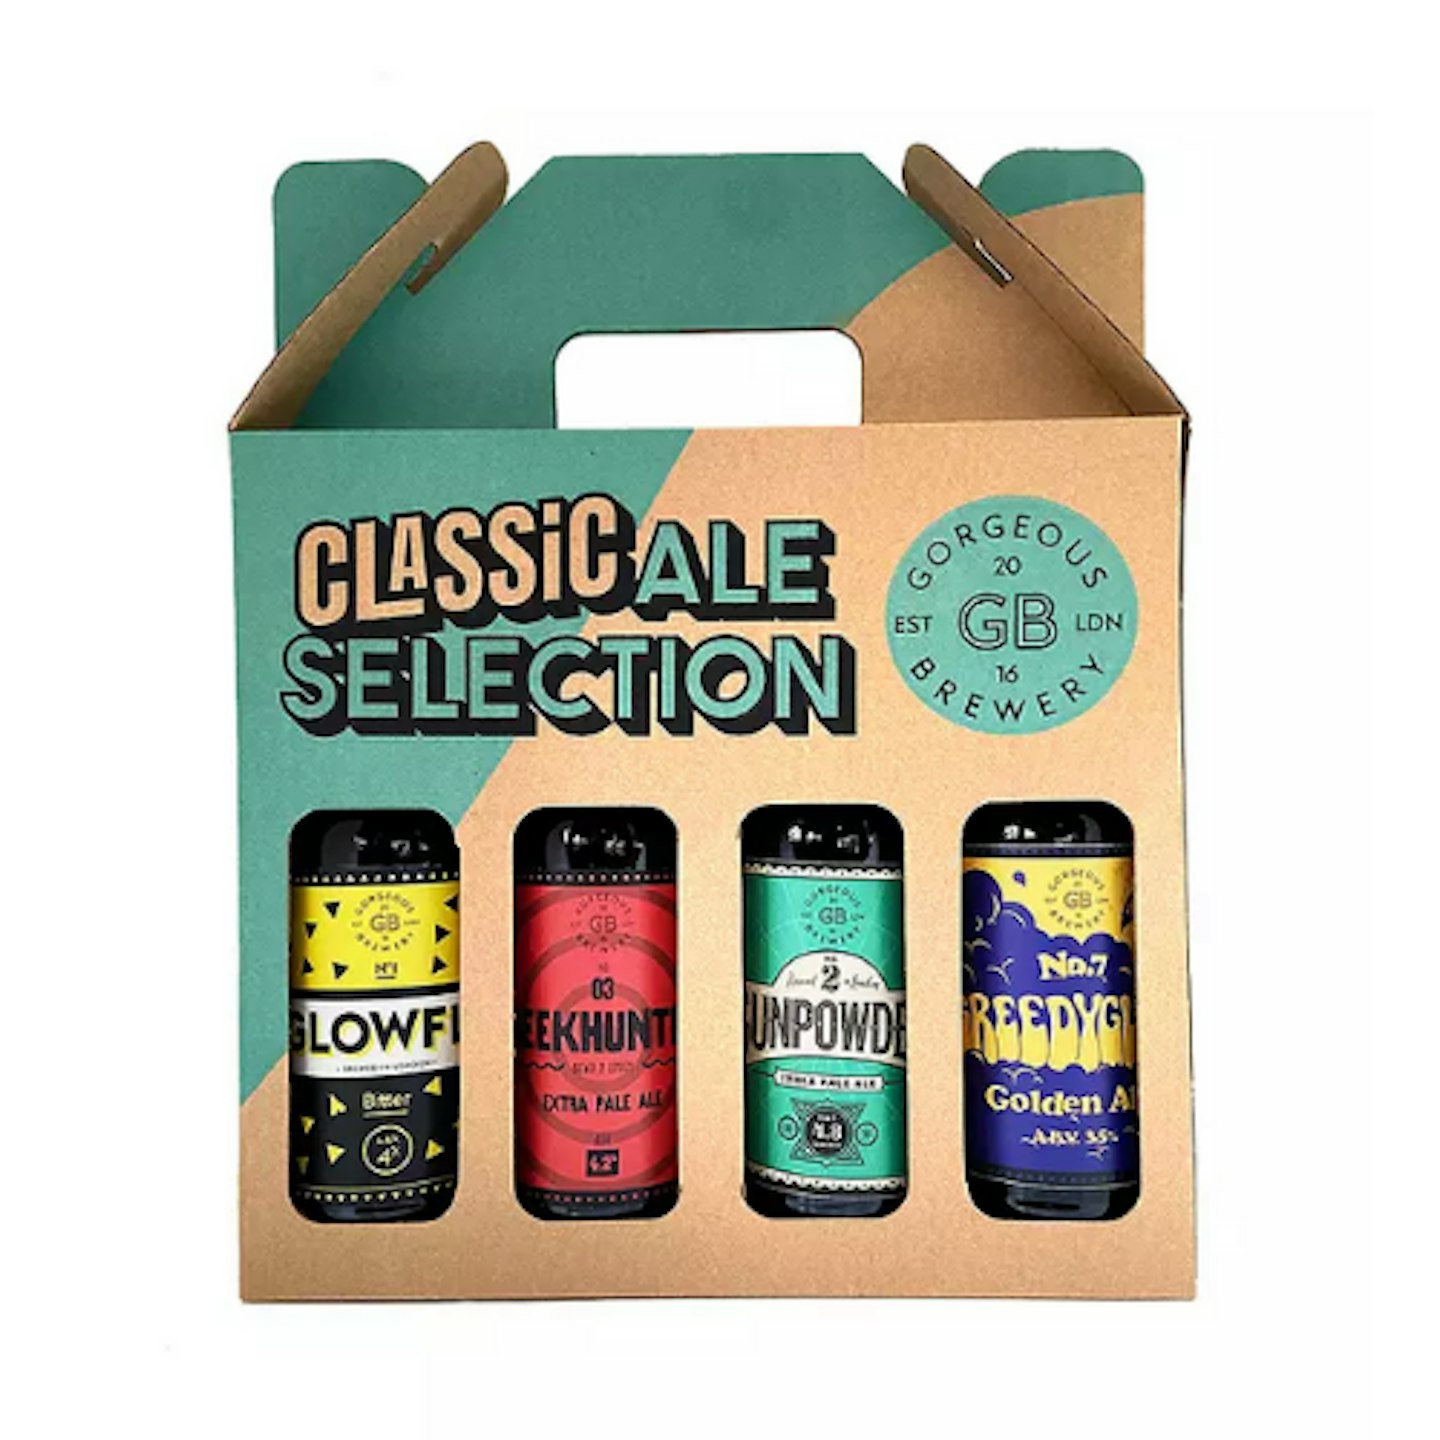 Gorgeous Brewery Classic Ale Selection, 4 x 330ml